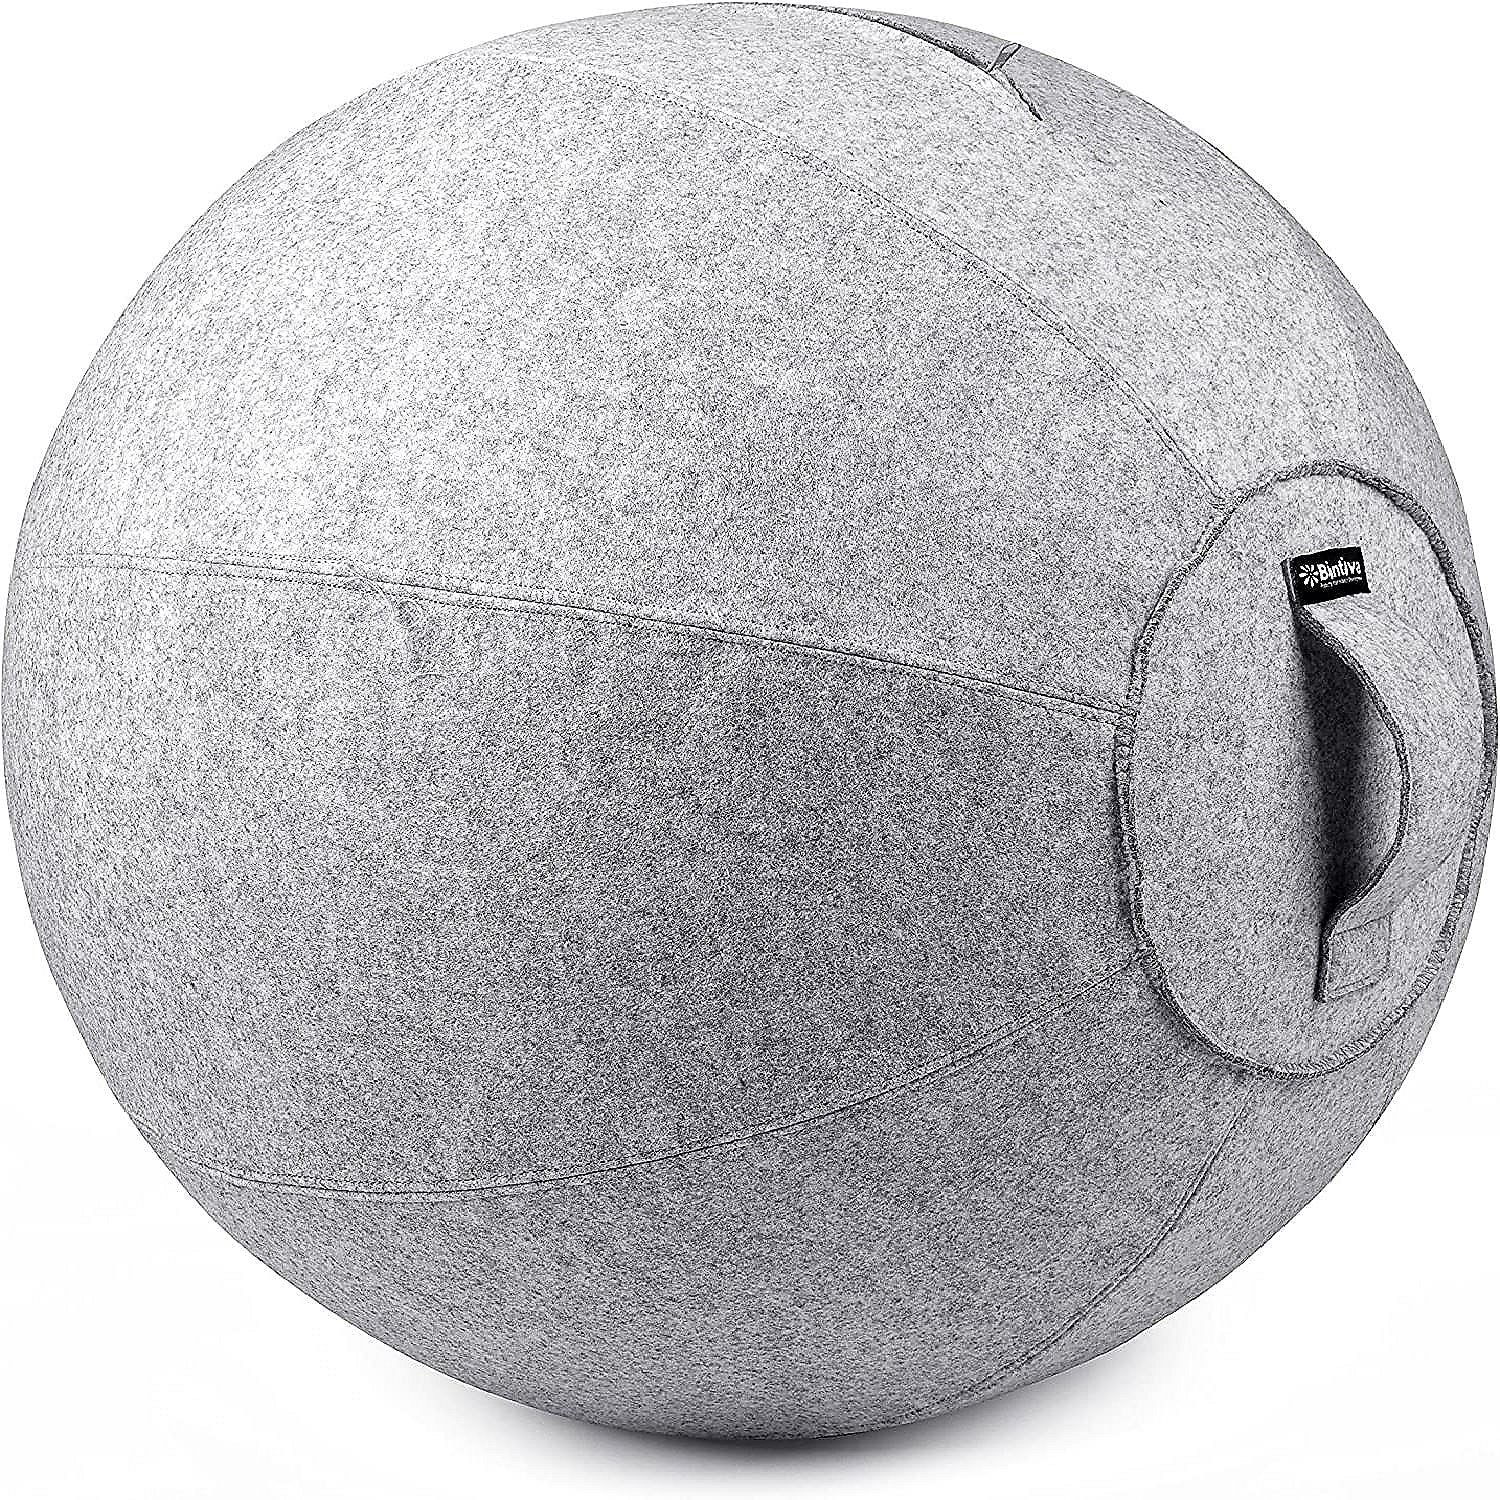 Stability Ball Chair, This revolutionary Stability Ball Chair is a standard, anti-burst, exercise ball that has an attractive, zippered, overlay that can be removed and washed.The non slip cover provides ultimate safety, and comfort, and features a convenient handle so that it can be easily transported. This versatile ball chair can also be used for yoga and balance exercises. The non-slip cover ensures stability and safety during poses and movements. Whether you're a yoga enthusiast, fitness enthusiast, or